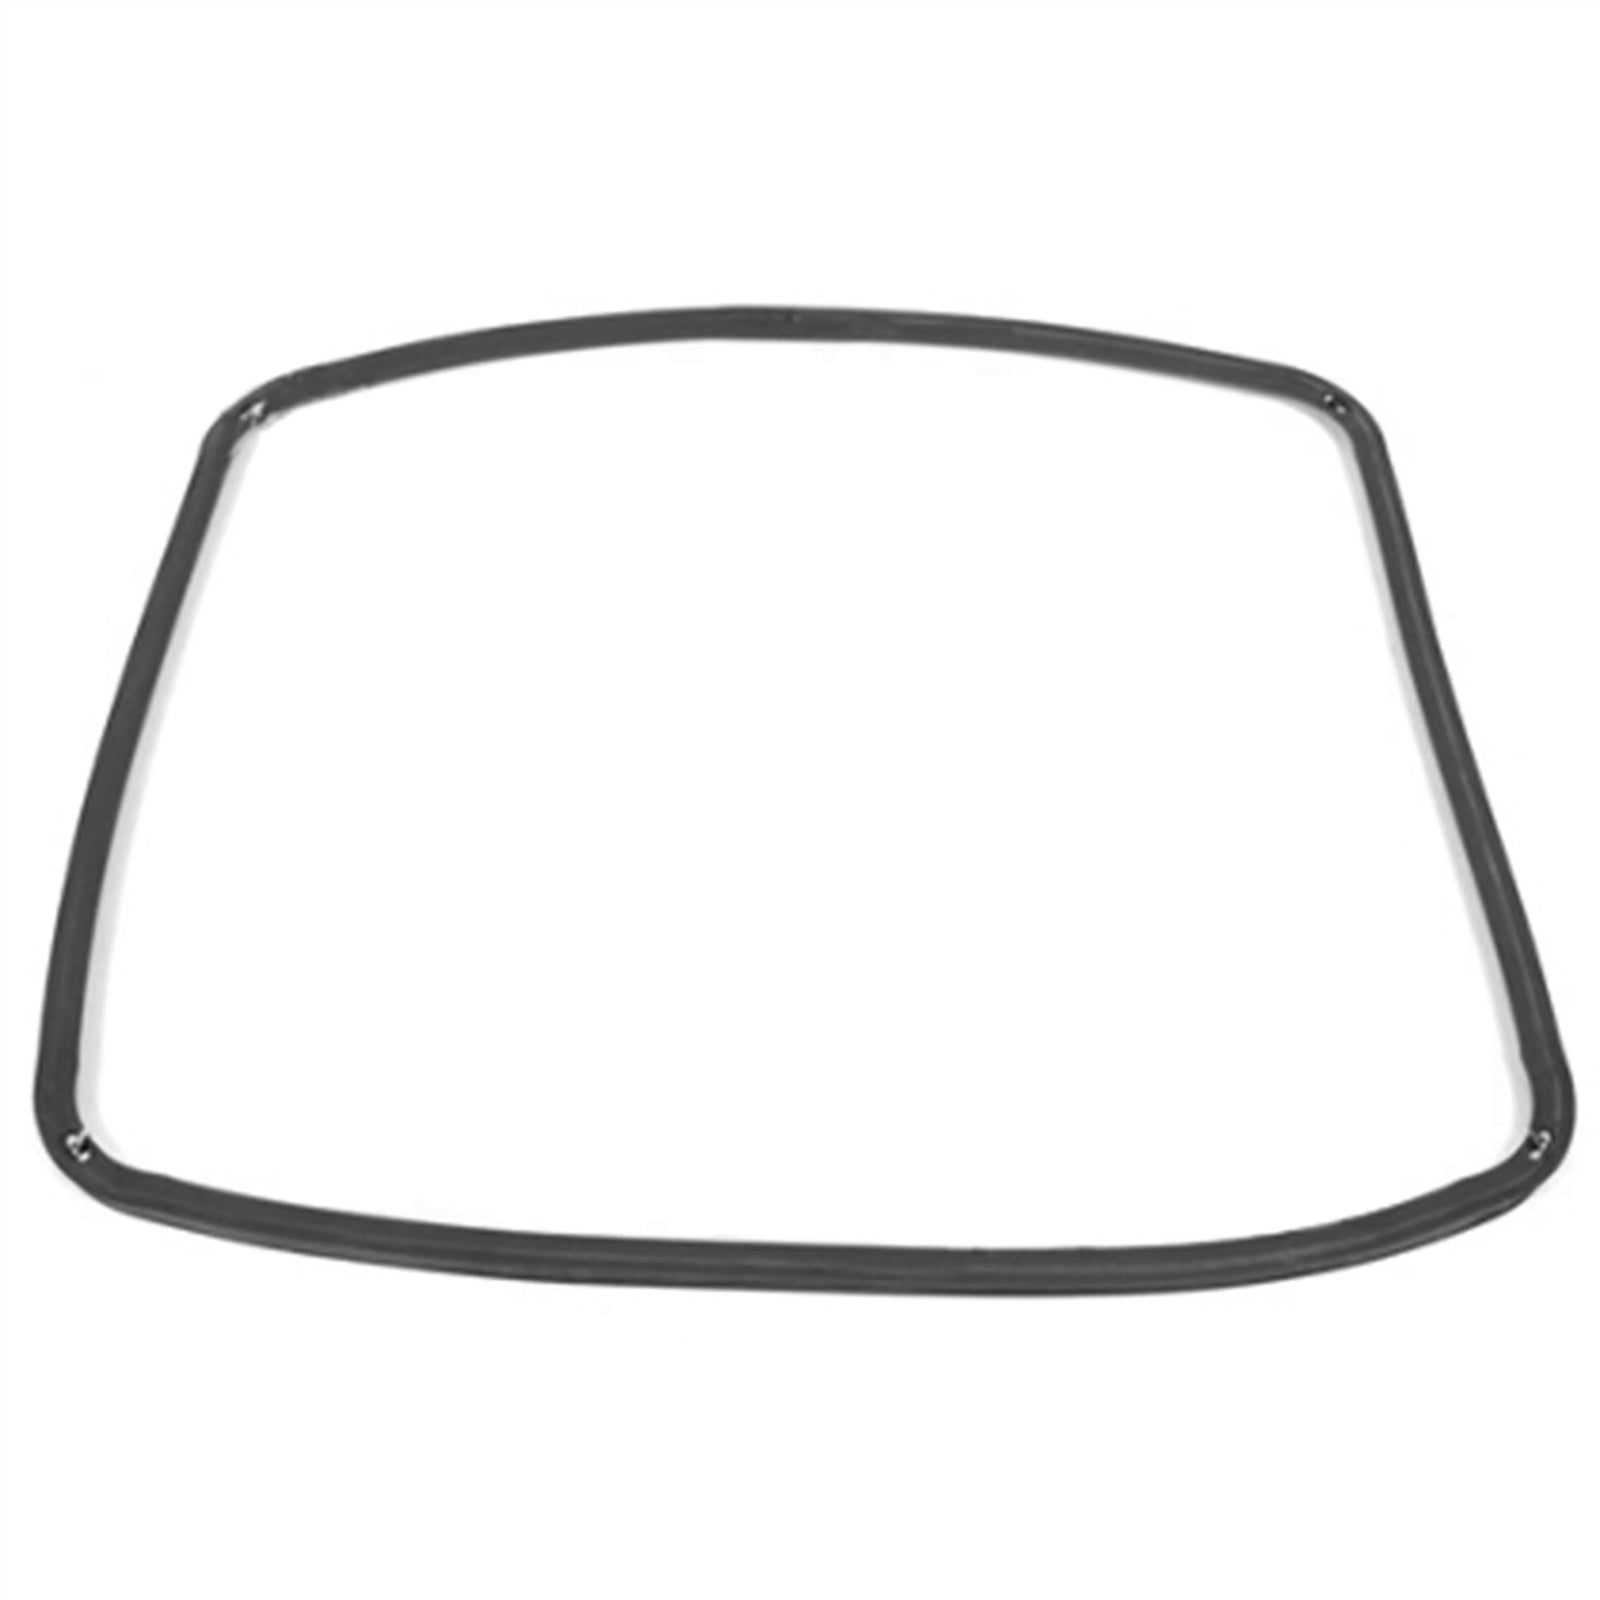 Main Rubber Door Seal with Corner Fixing Clips for Creda Oven Cookers (445mm x 350mm)